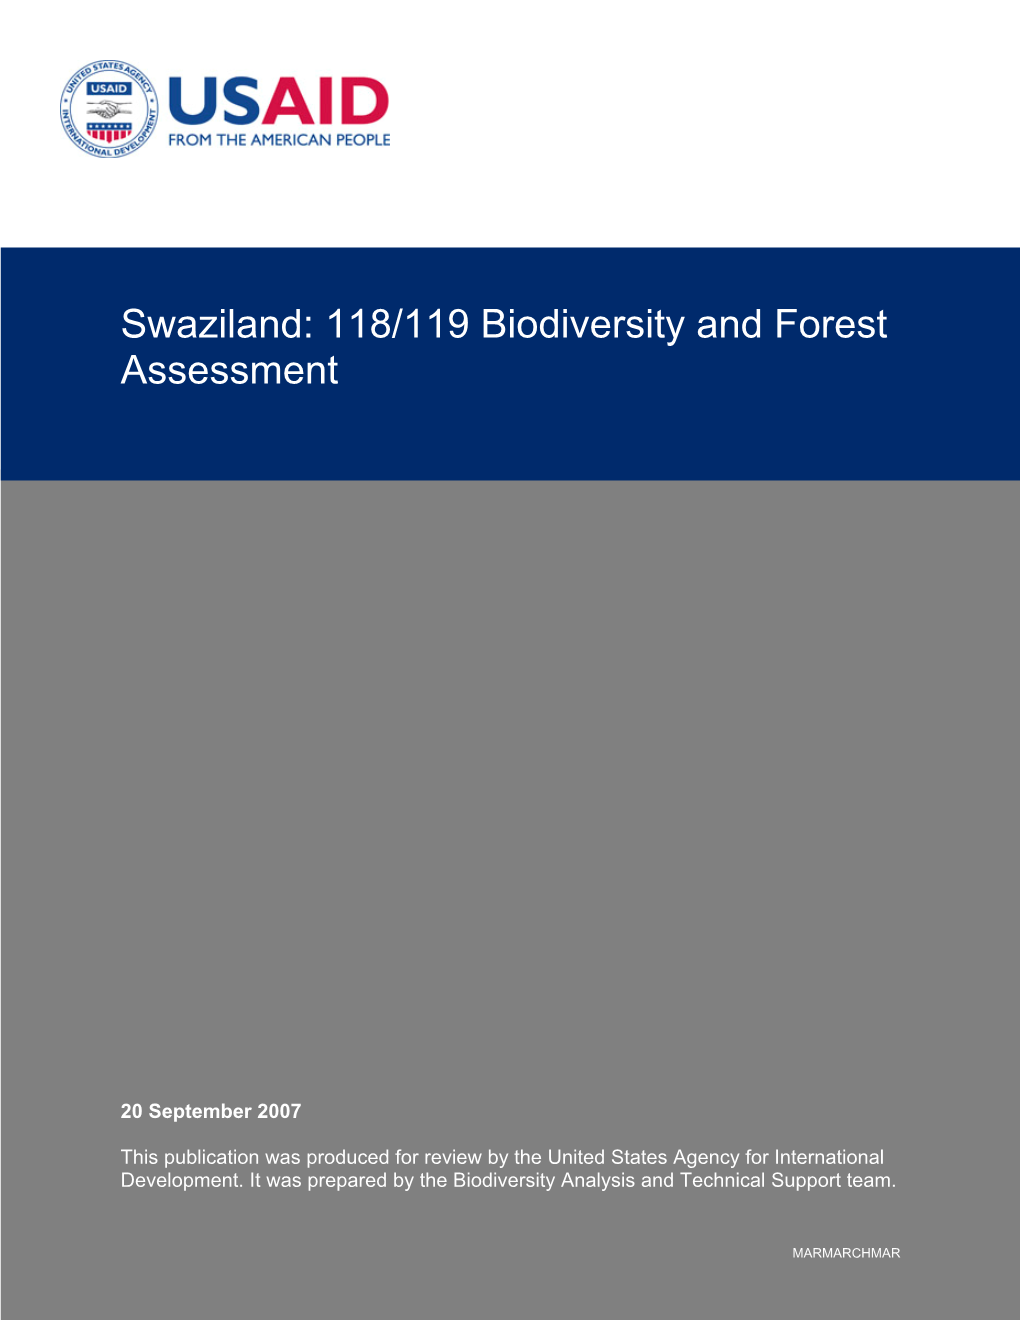 Swaziland: 118/119 Biodiversity and Forest Assessment